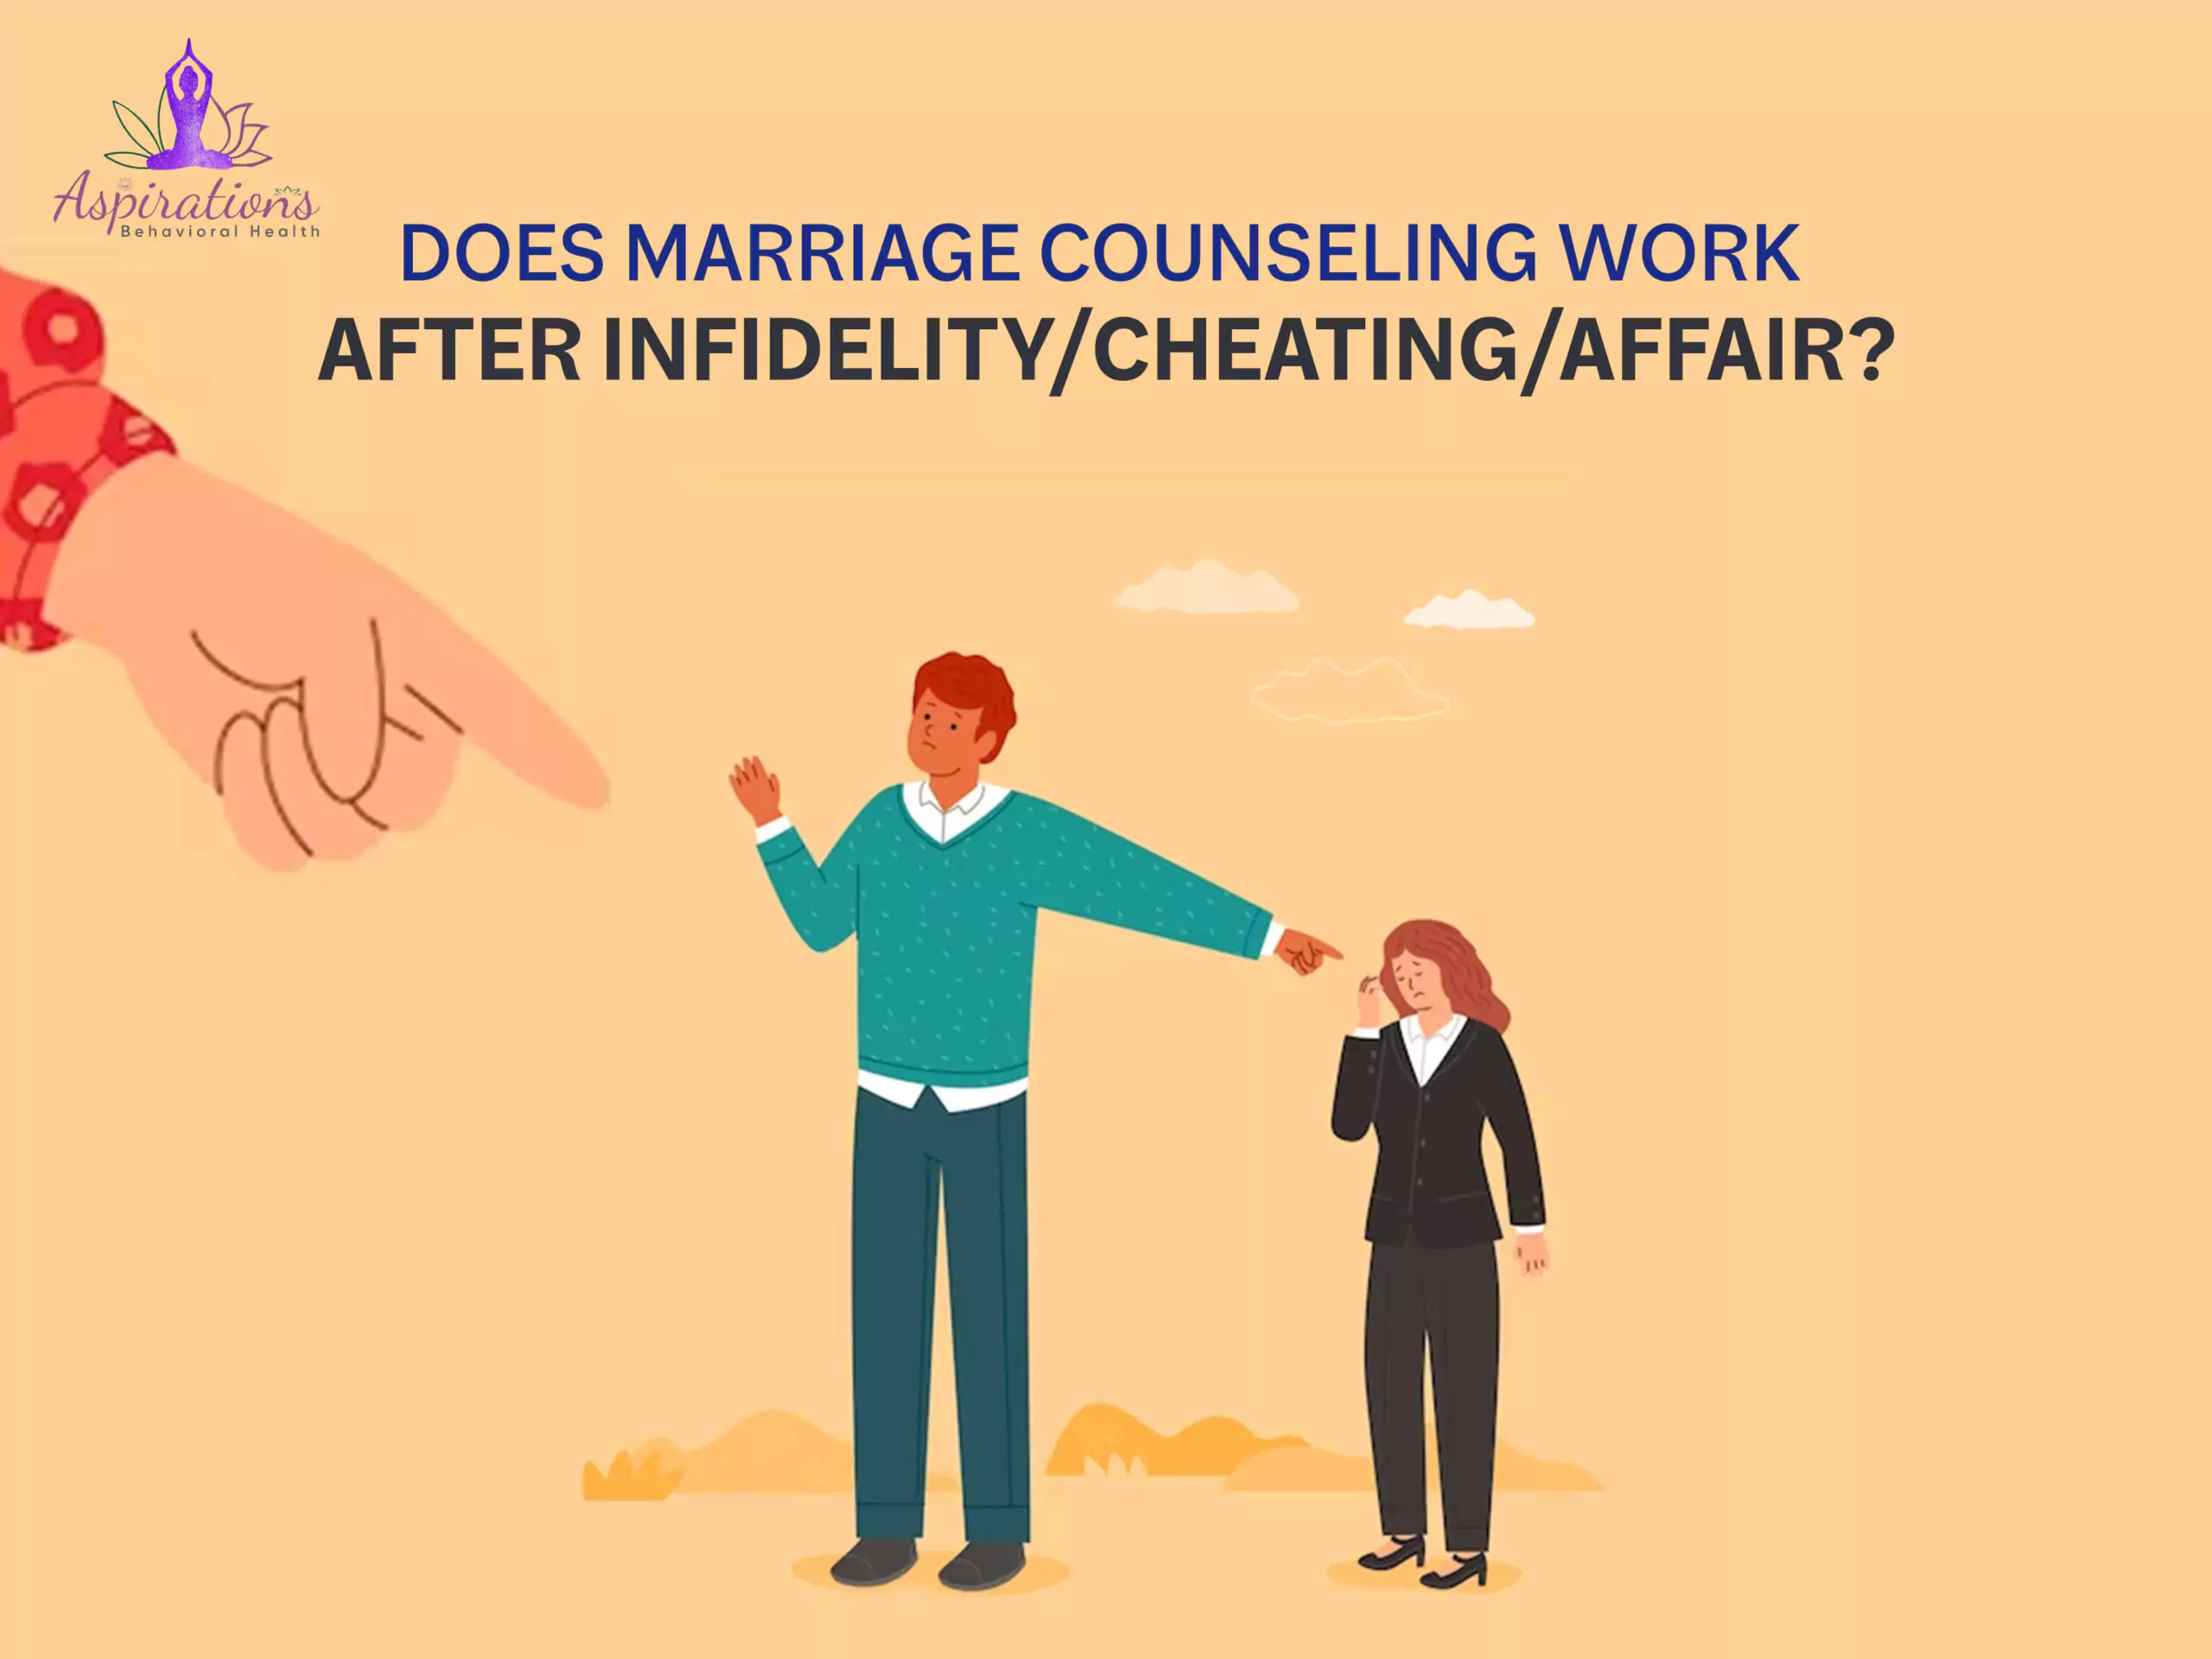 Does Marriage Counseling Work after Infidelity? Answered By Expert